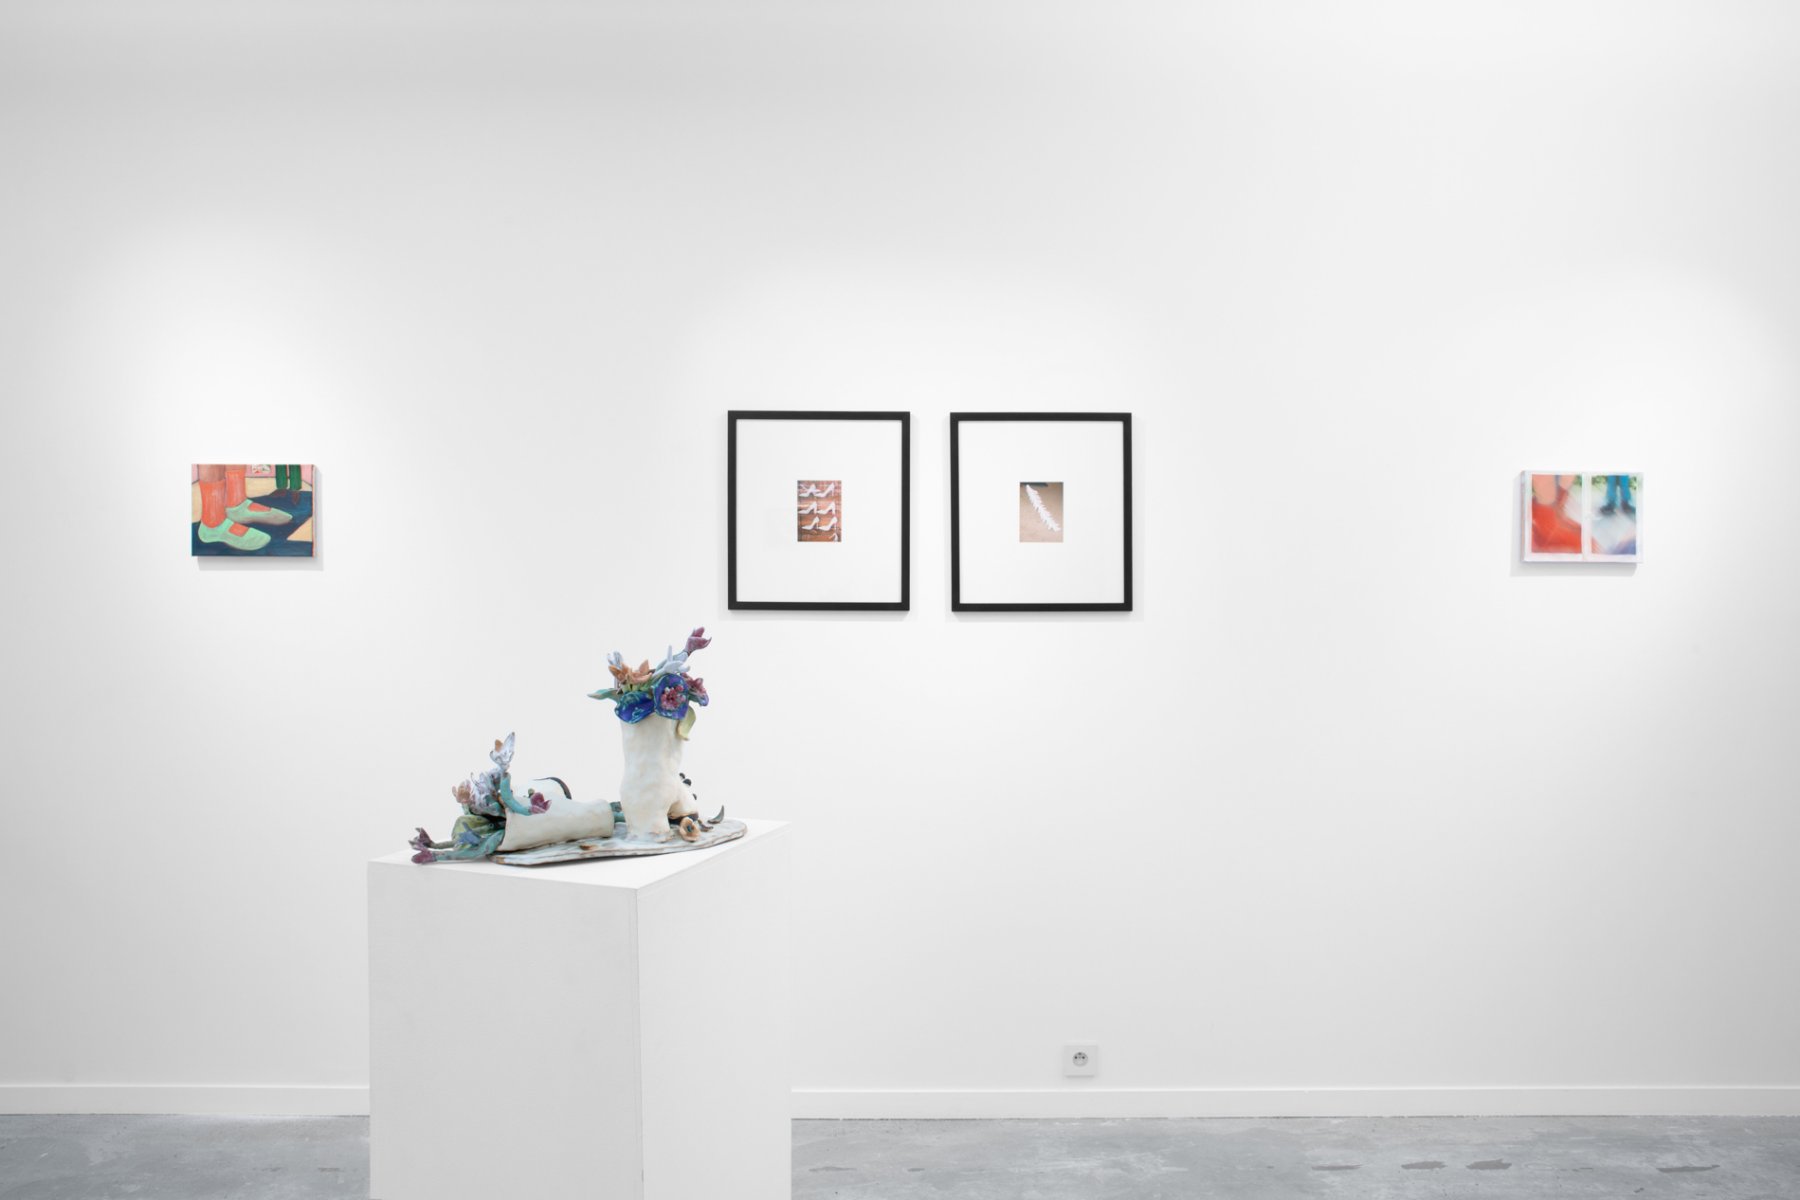 Image from our show of the day, Petite Shoe Show @ Adrian Sutton Gallery